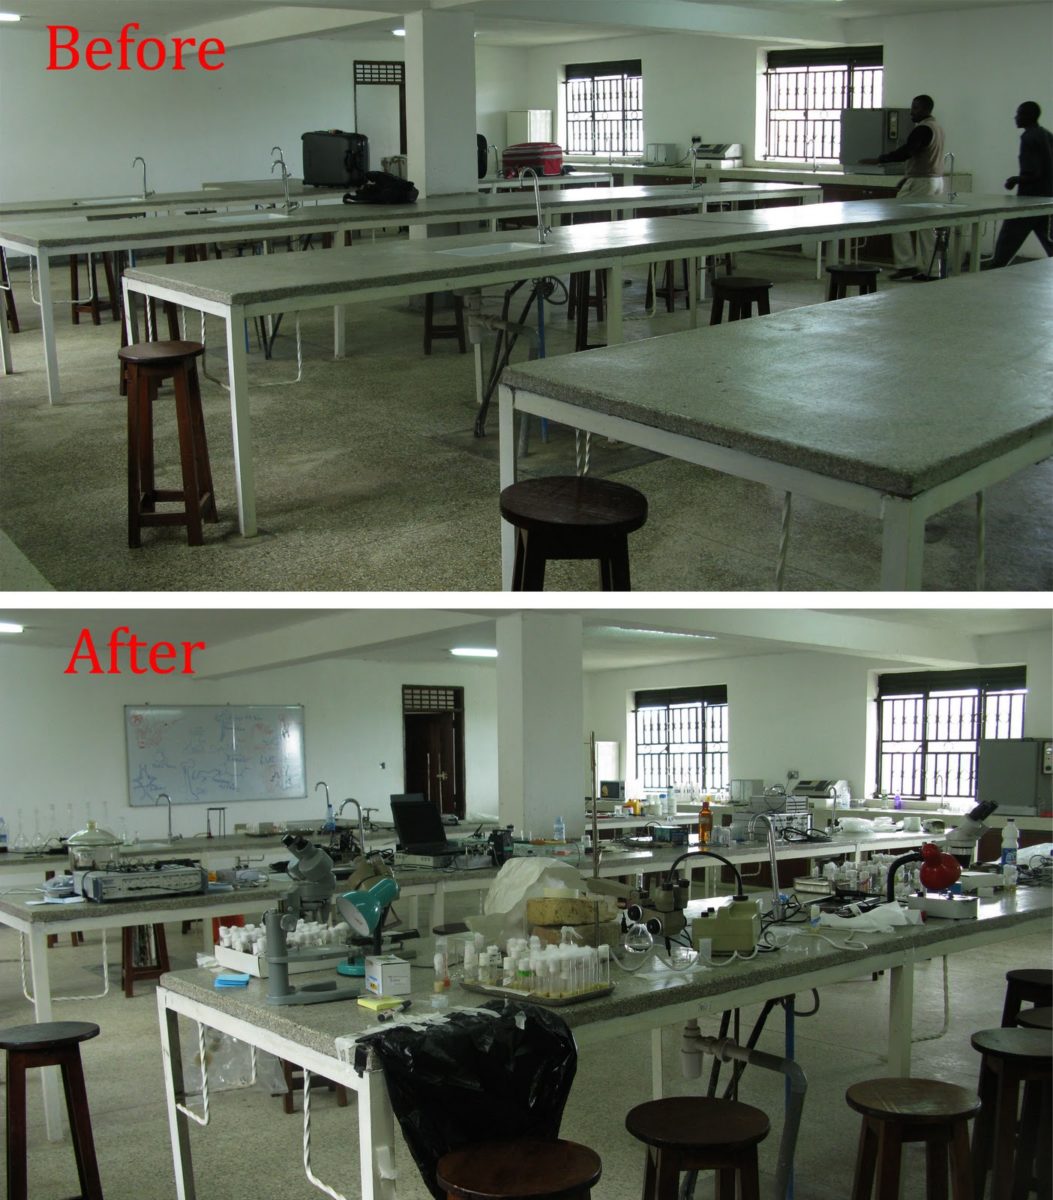 Before and after pictures of a lab equipped with the help of TReND.